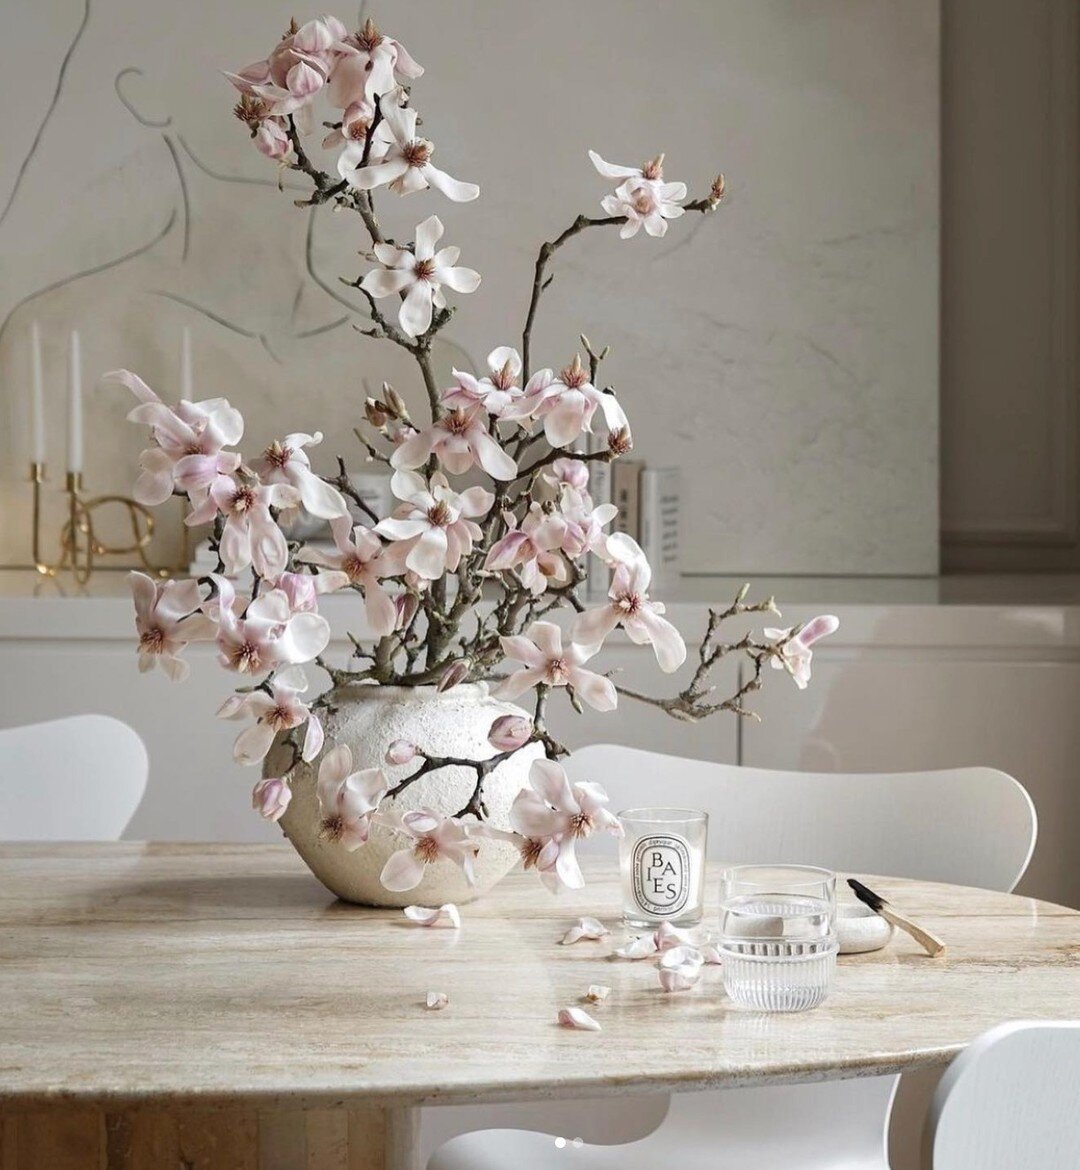 Feng ShualiTip : Feng Shui &amp; Flowers 🌸👇🏻

Did you know that any flowers are living chi and can change or enhance the mood of a space? 

Using colored flowers in specific sections of the home is a powerful Feng Shui tool to, for example, attrac